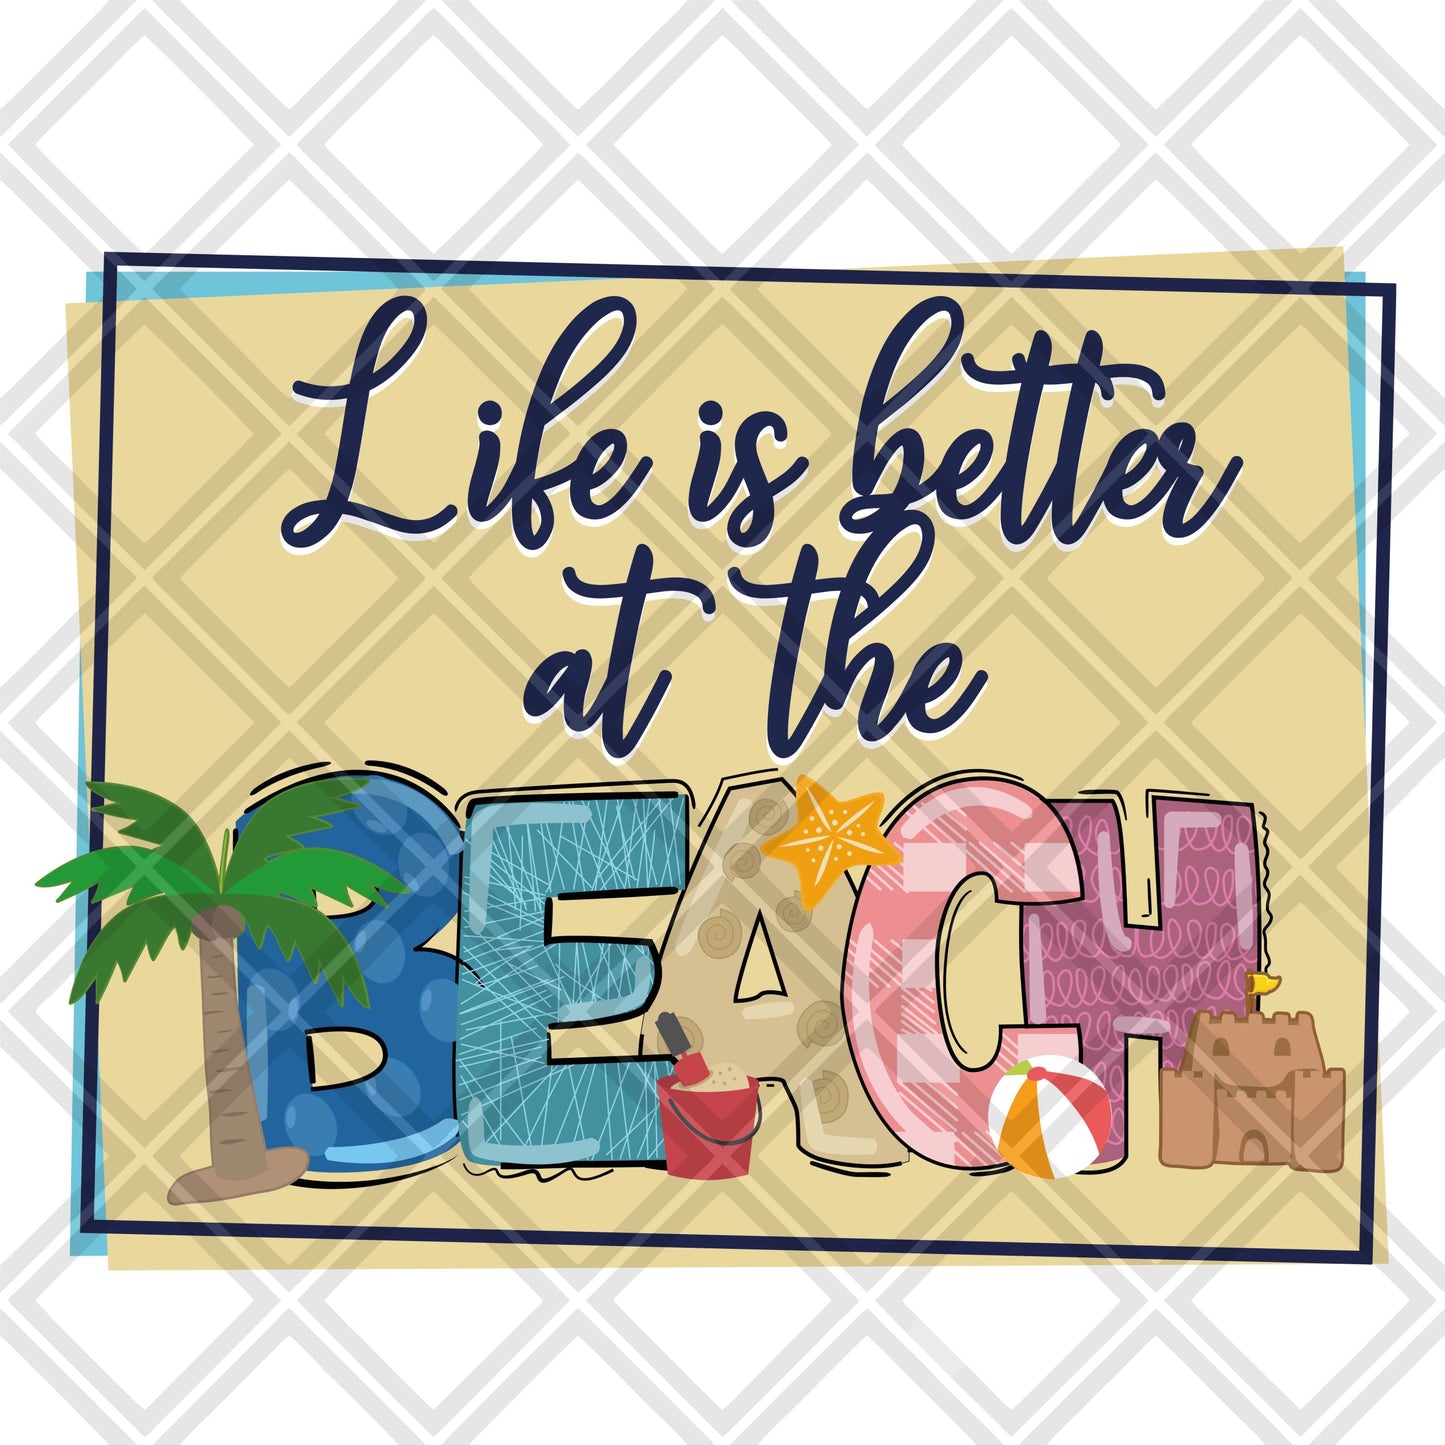 Life is better at the beach DTF TRANSFERPRINT TO ORDER